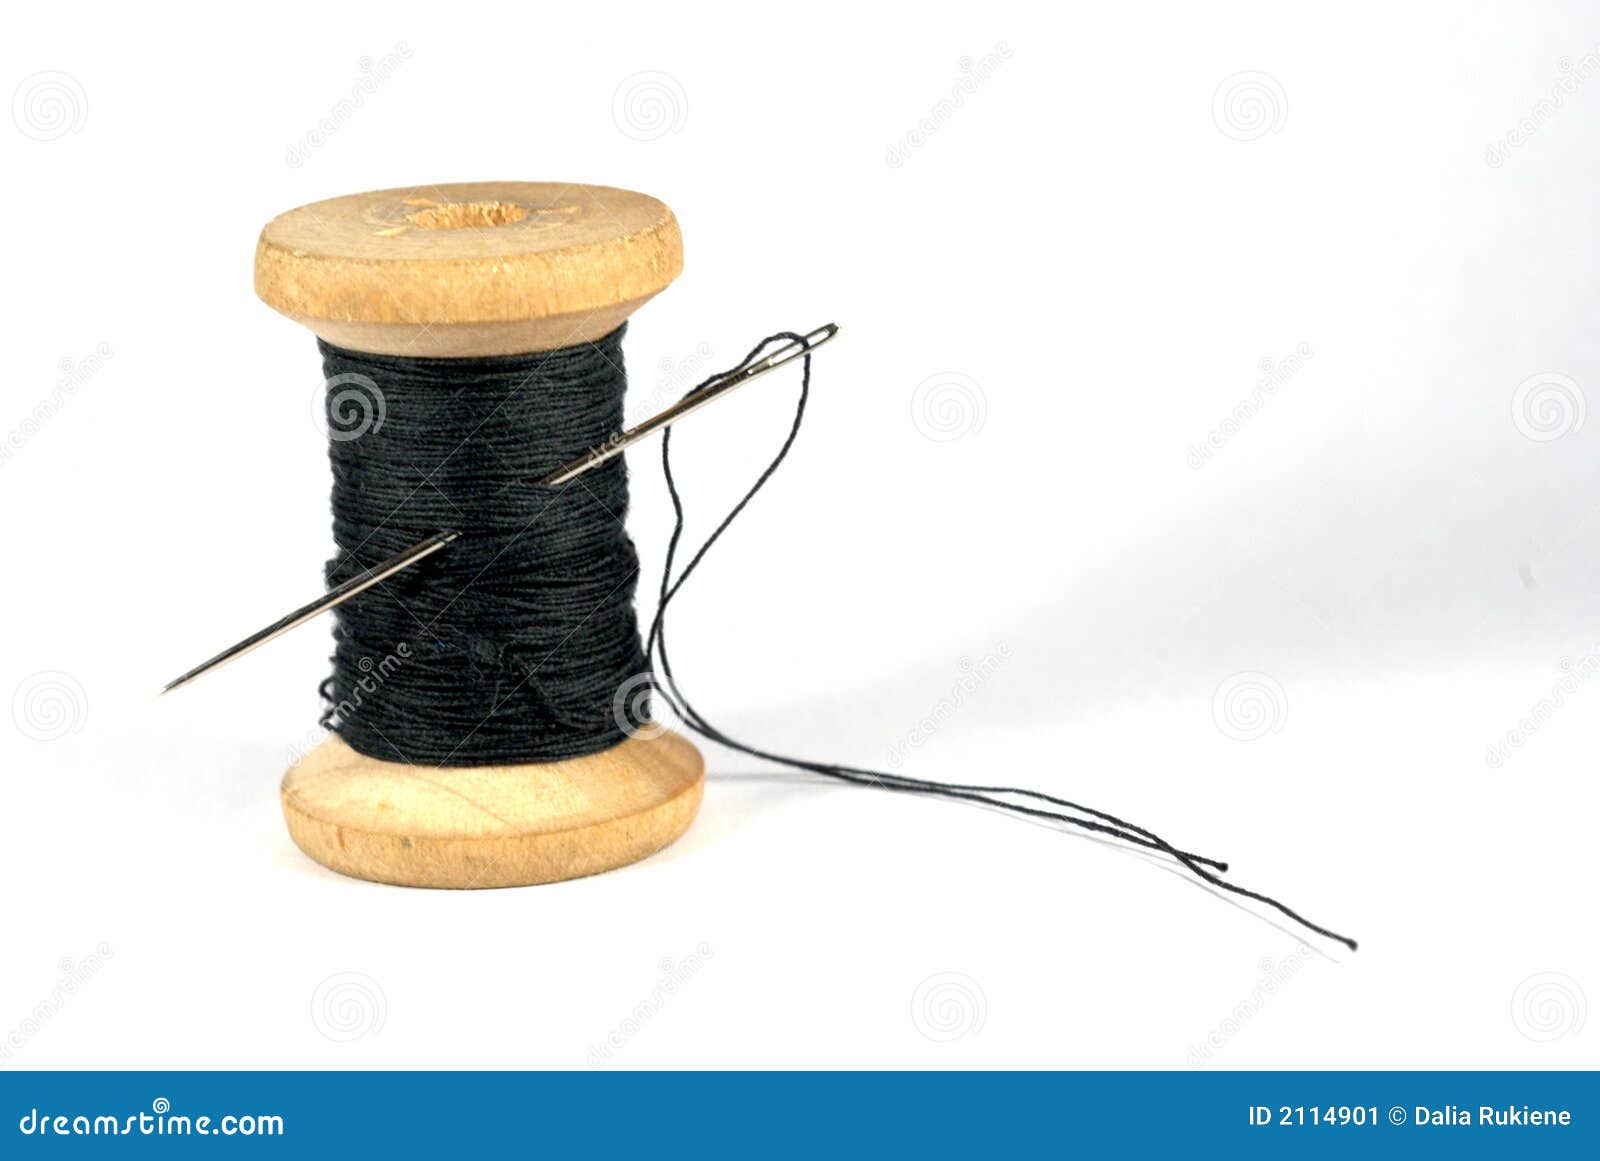 needle and a thread